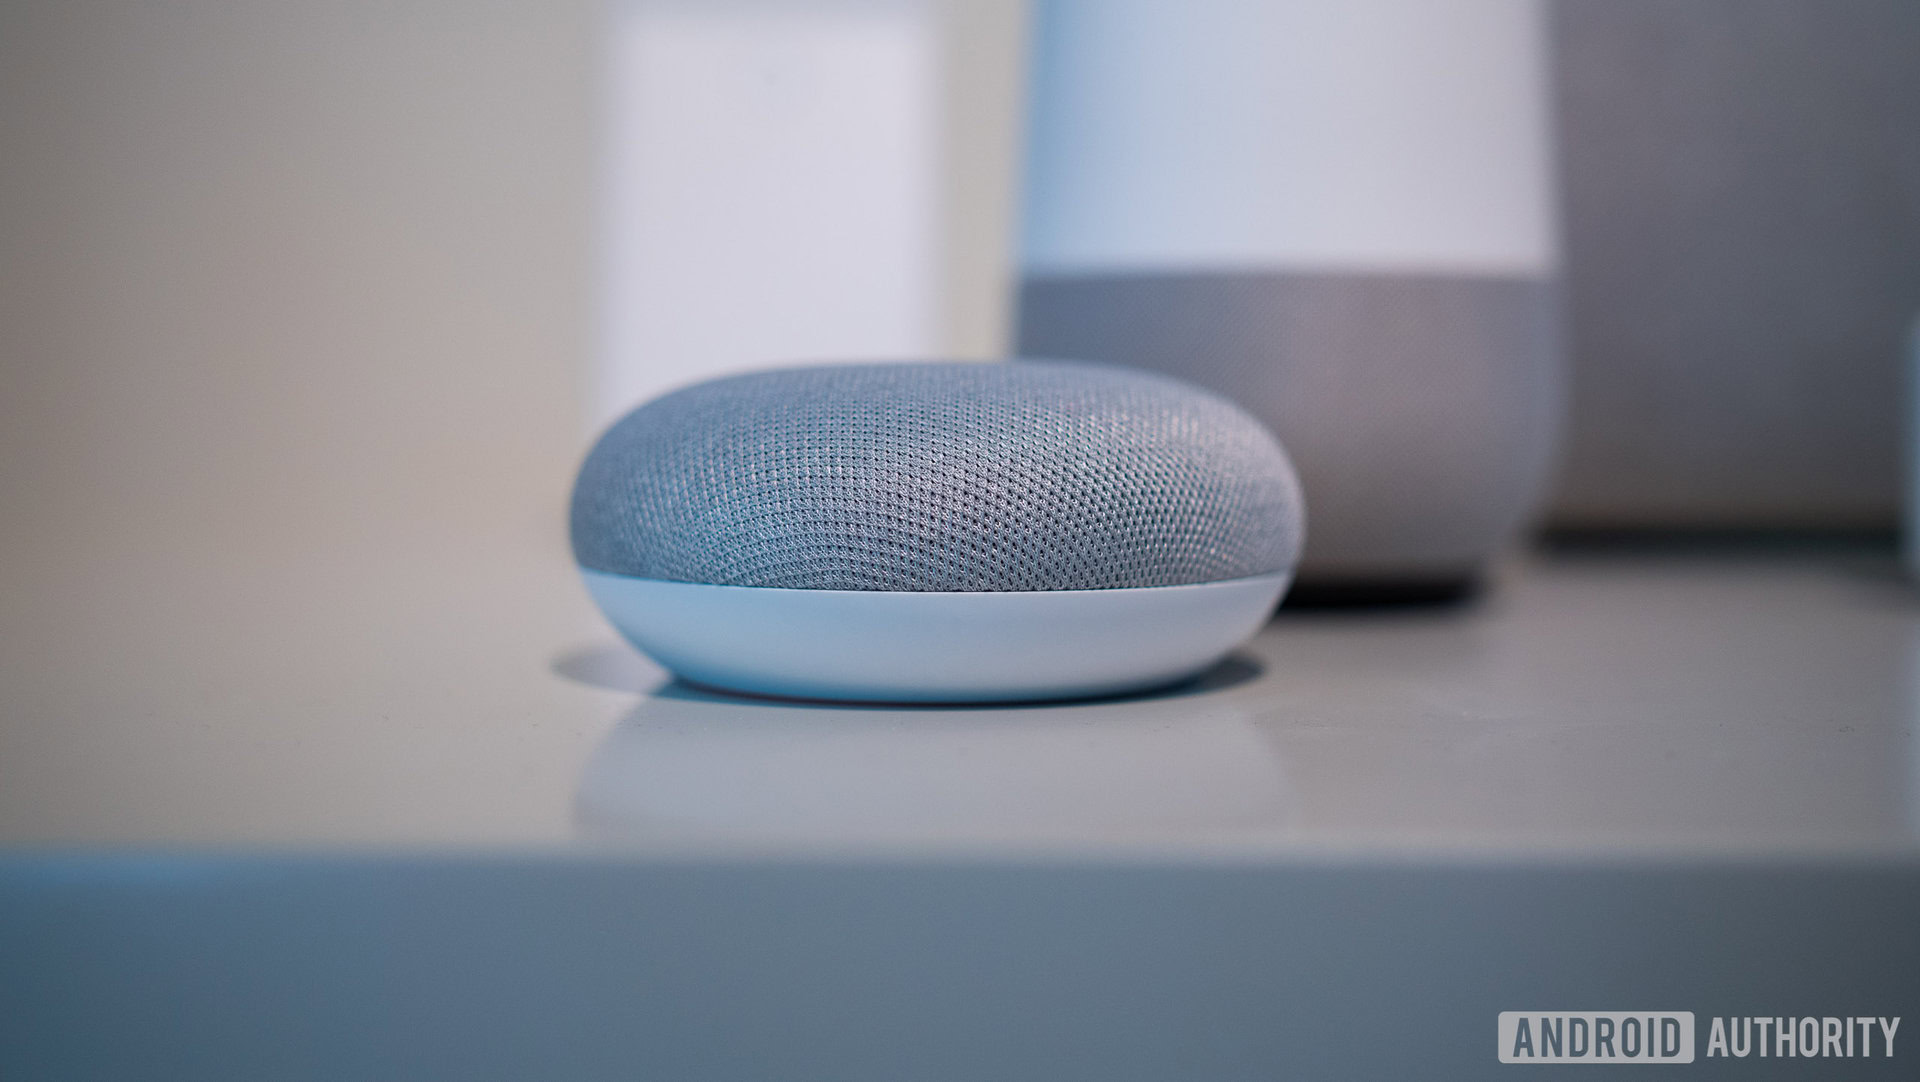 Google Home supported devices: Here's a list of devices that work with Home